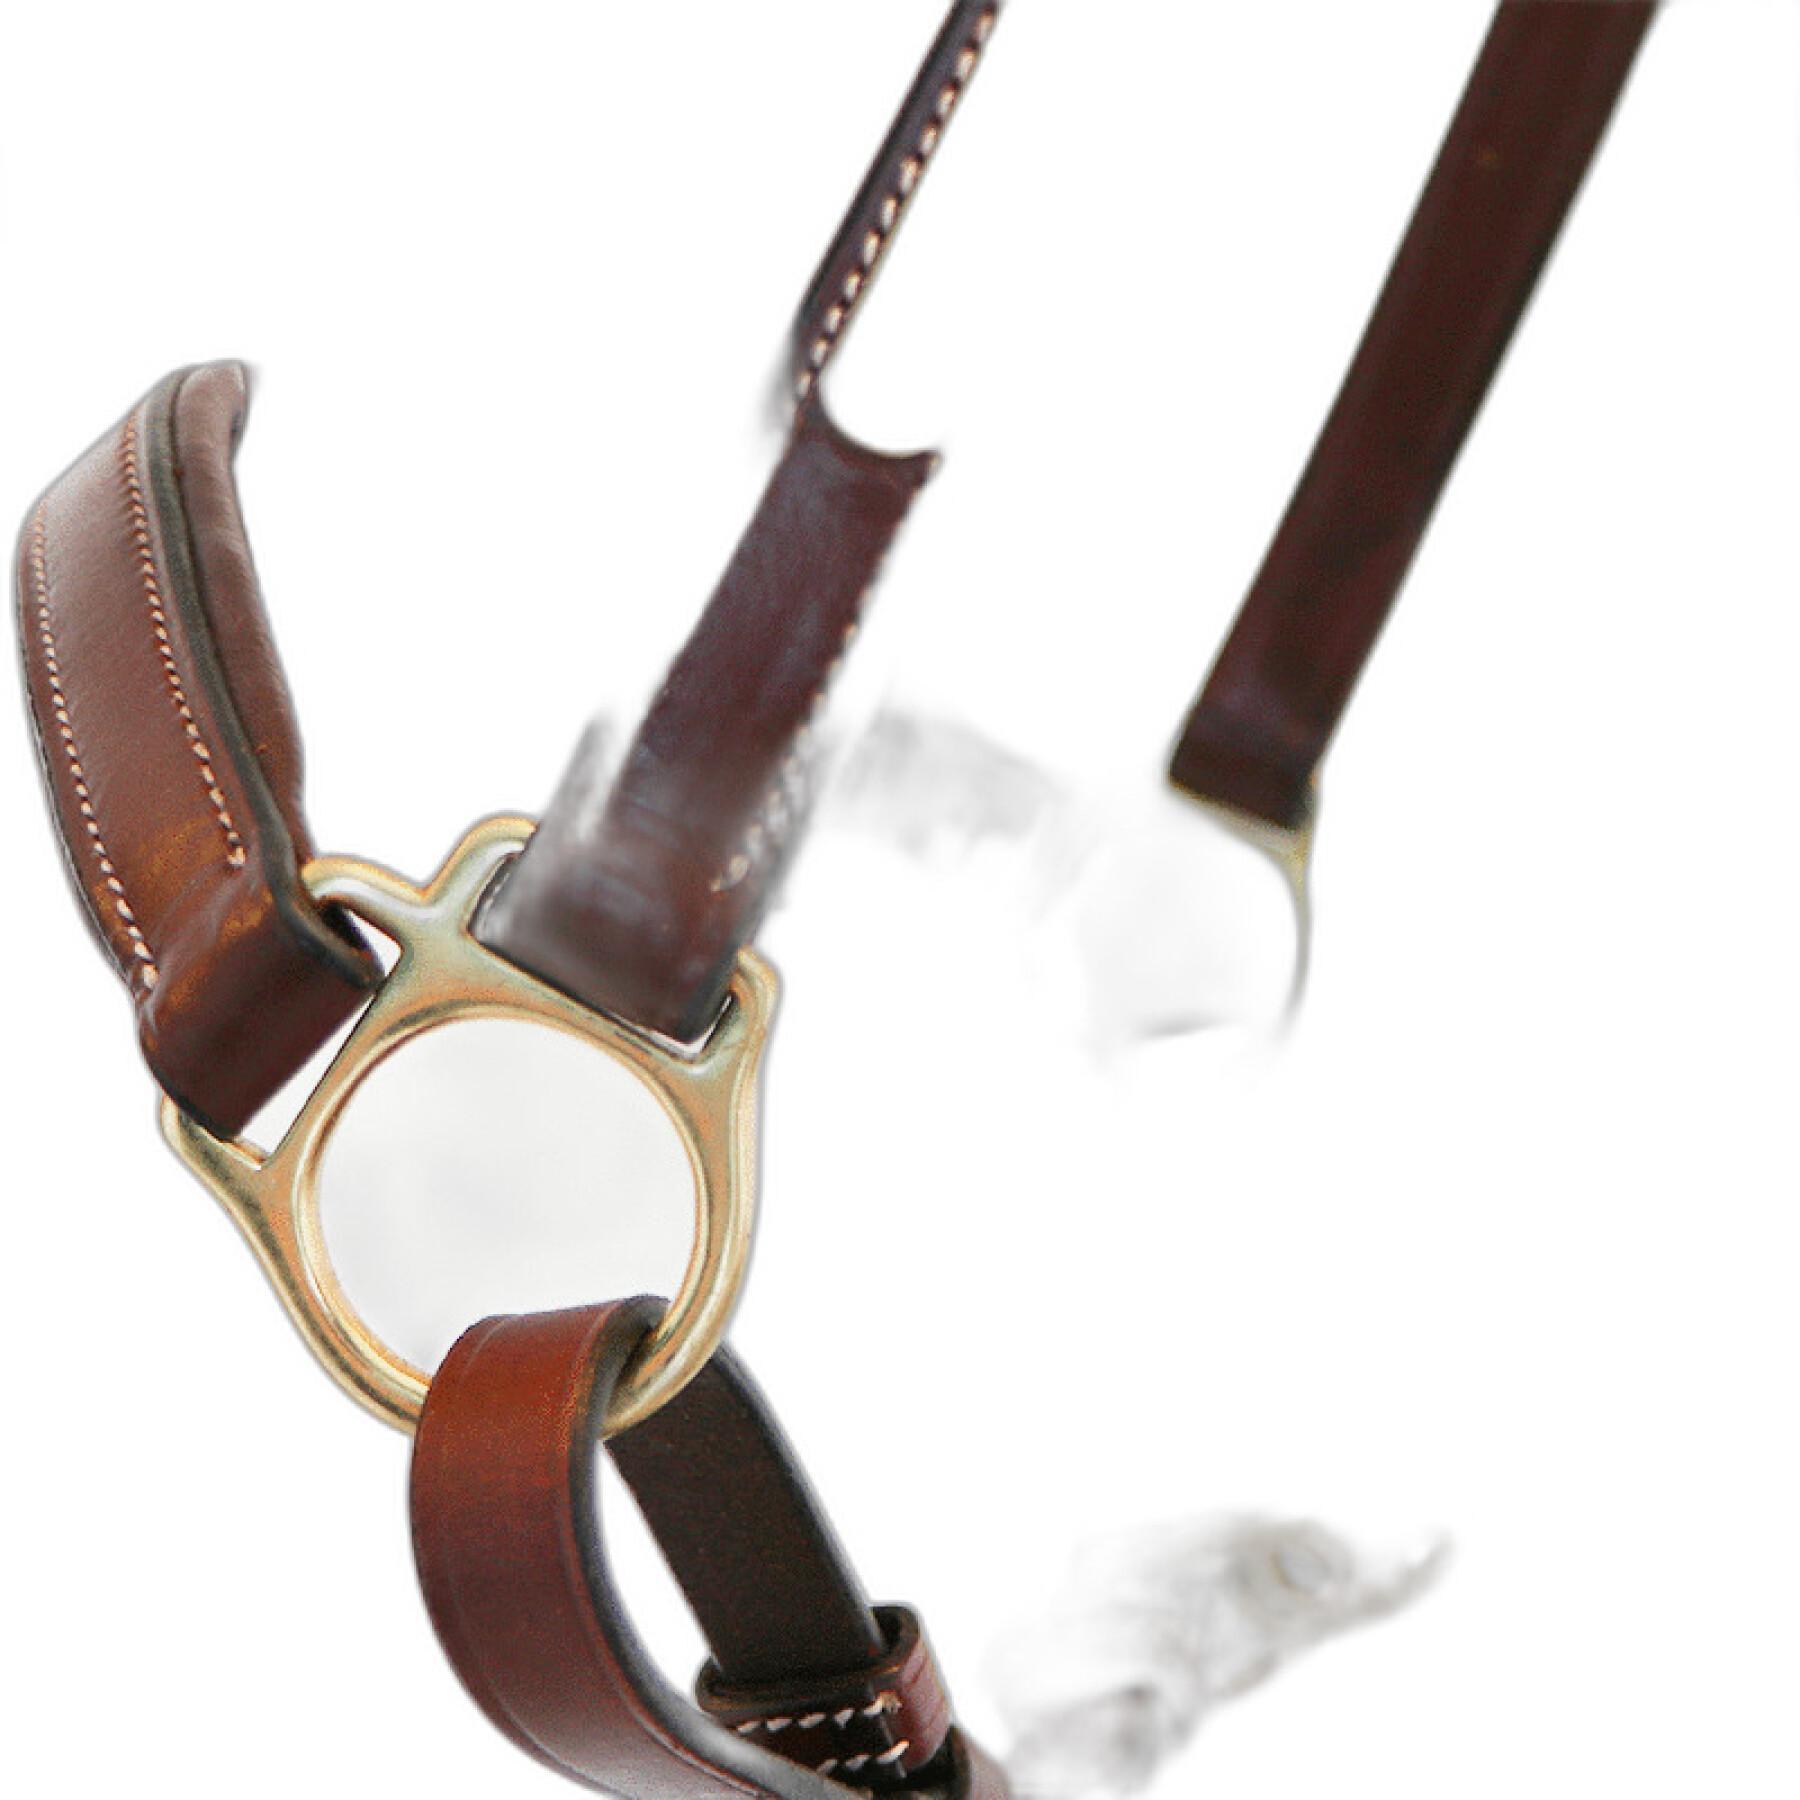 Halter for pony leather grooming ERIC THOMAS “Pro”